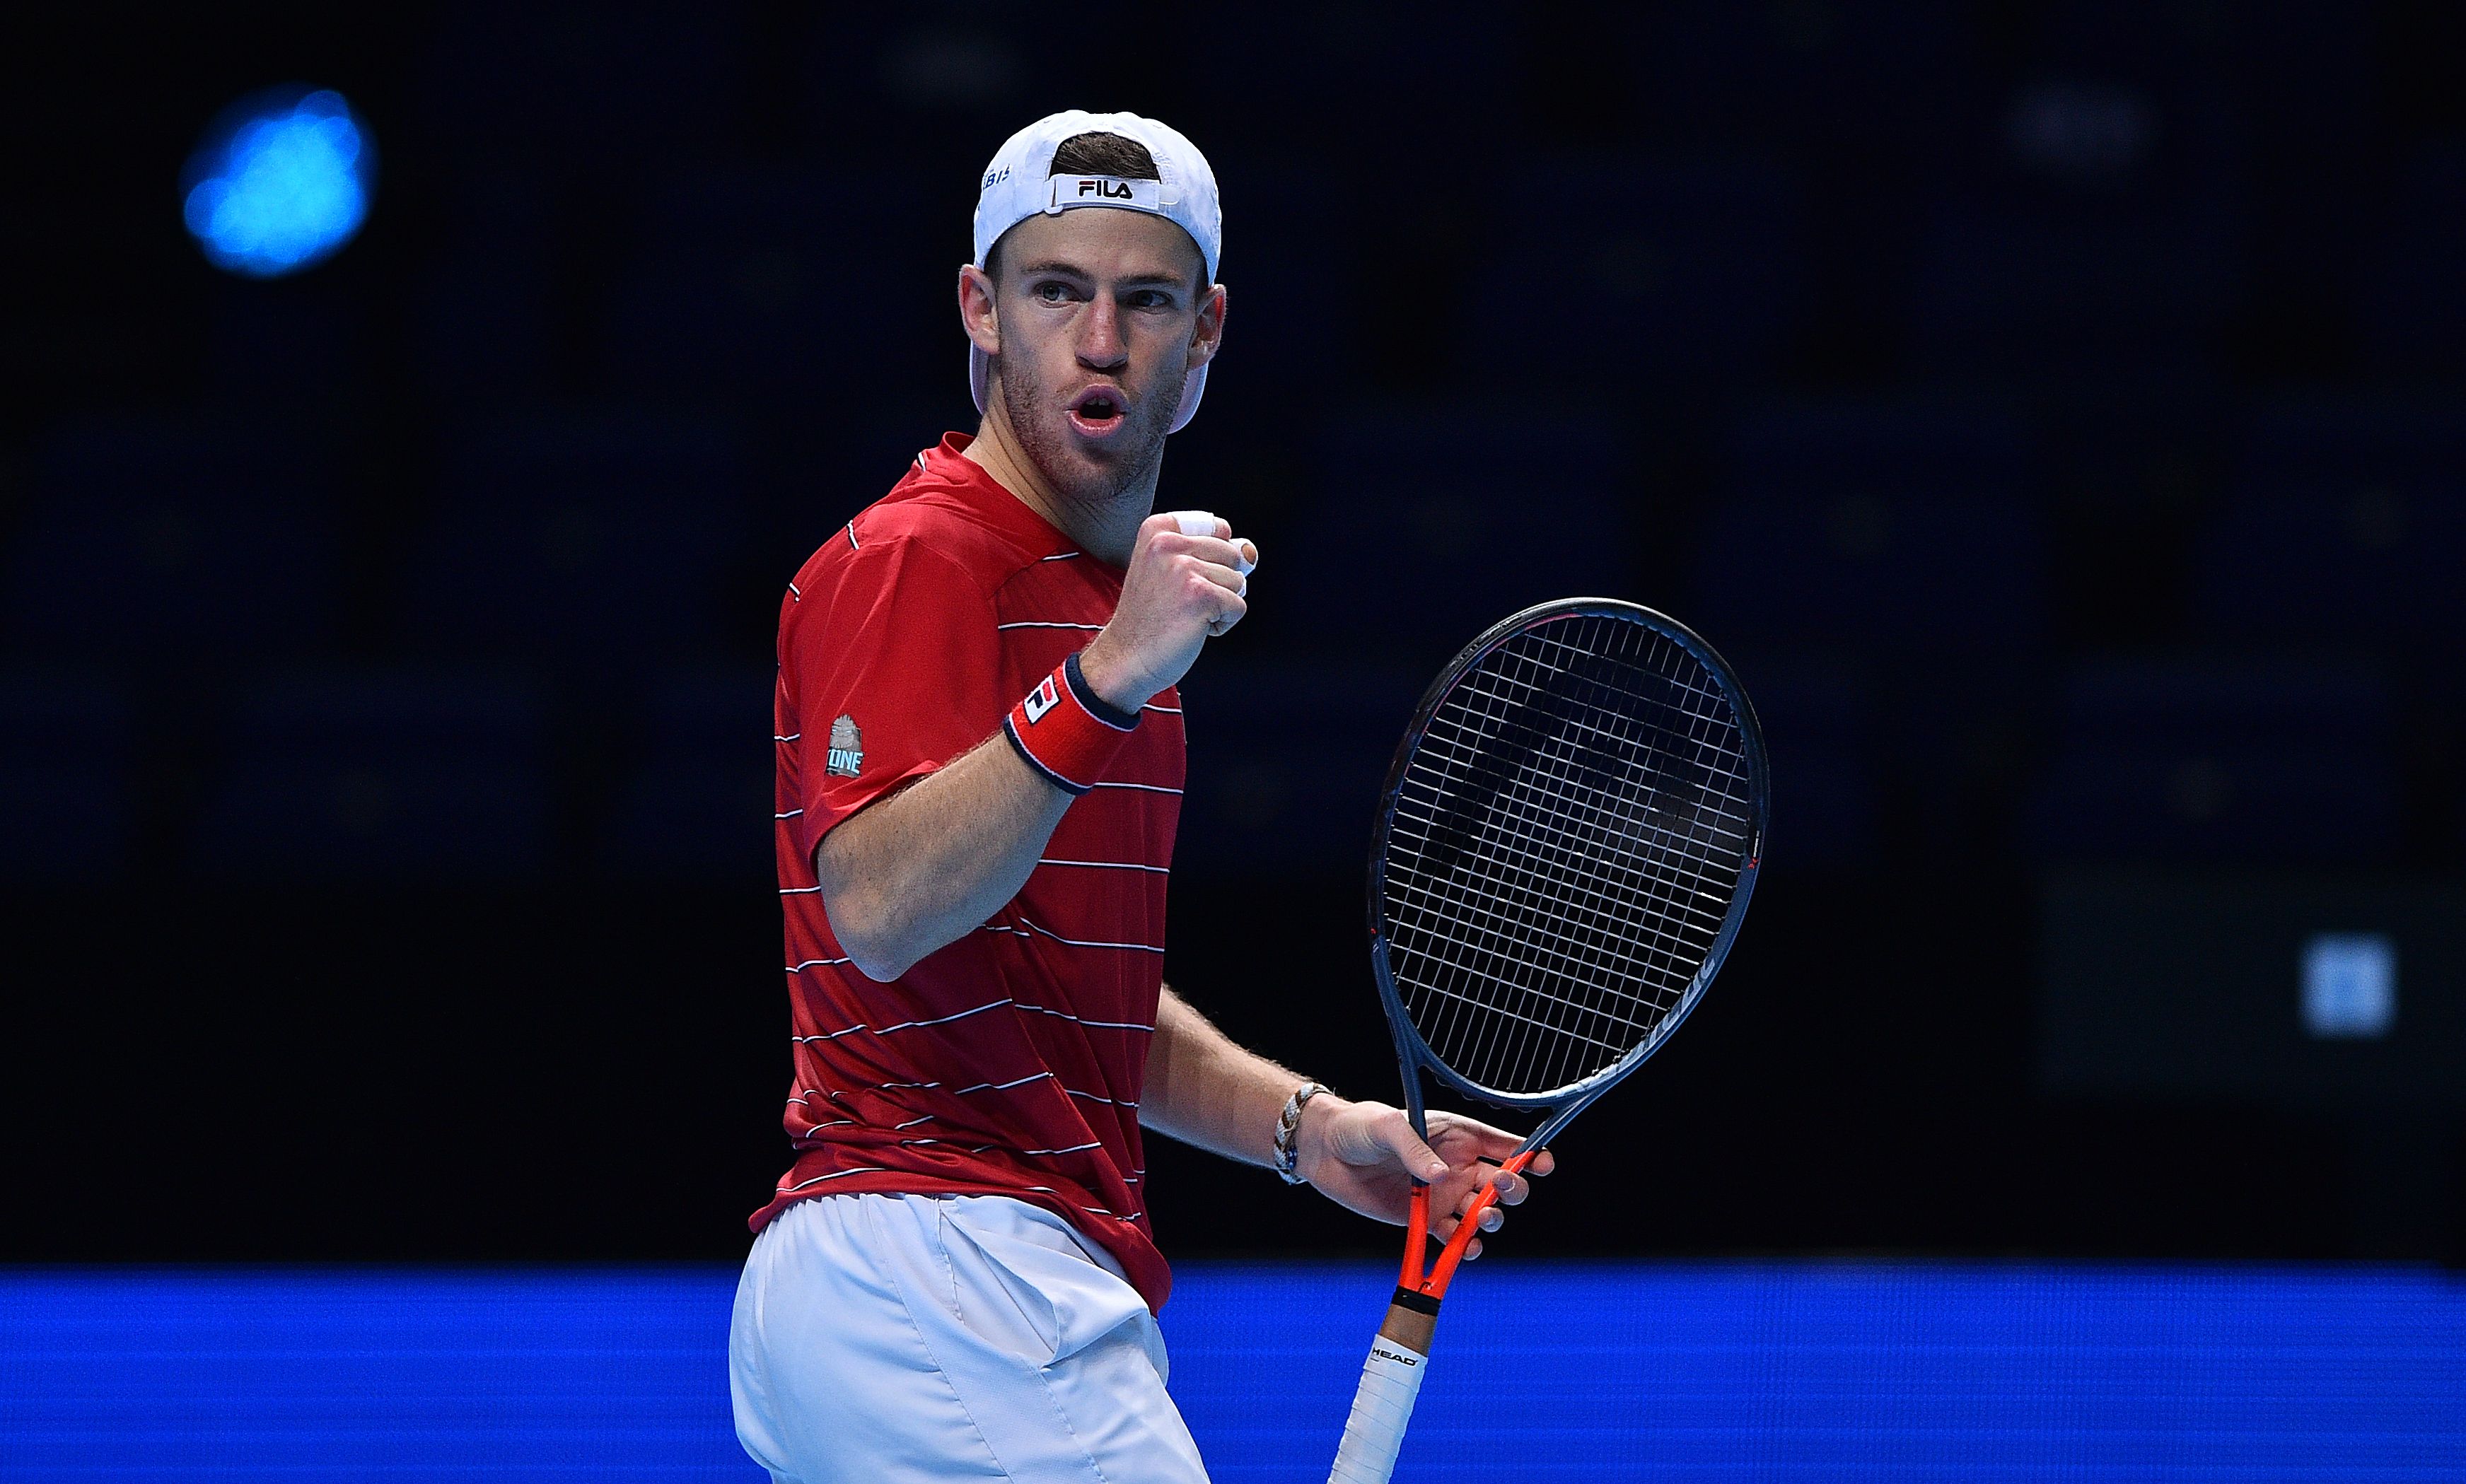 Diego Schwartzman aiming to build on first ATP Finals appearance